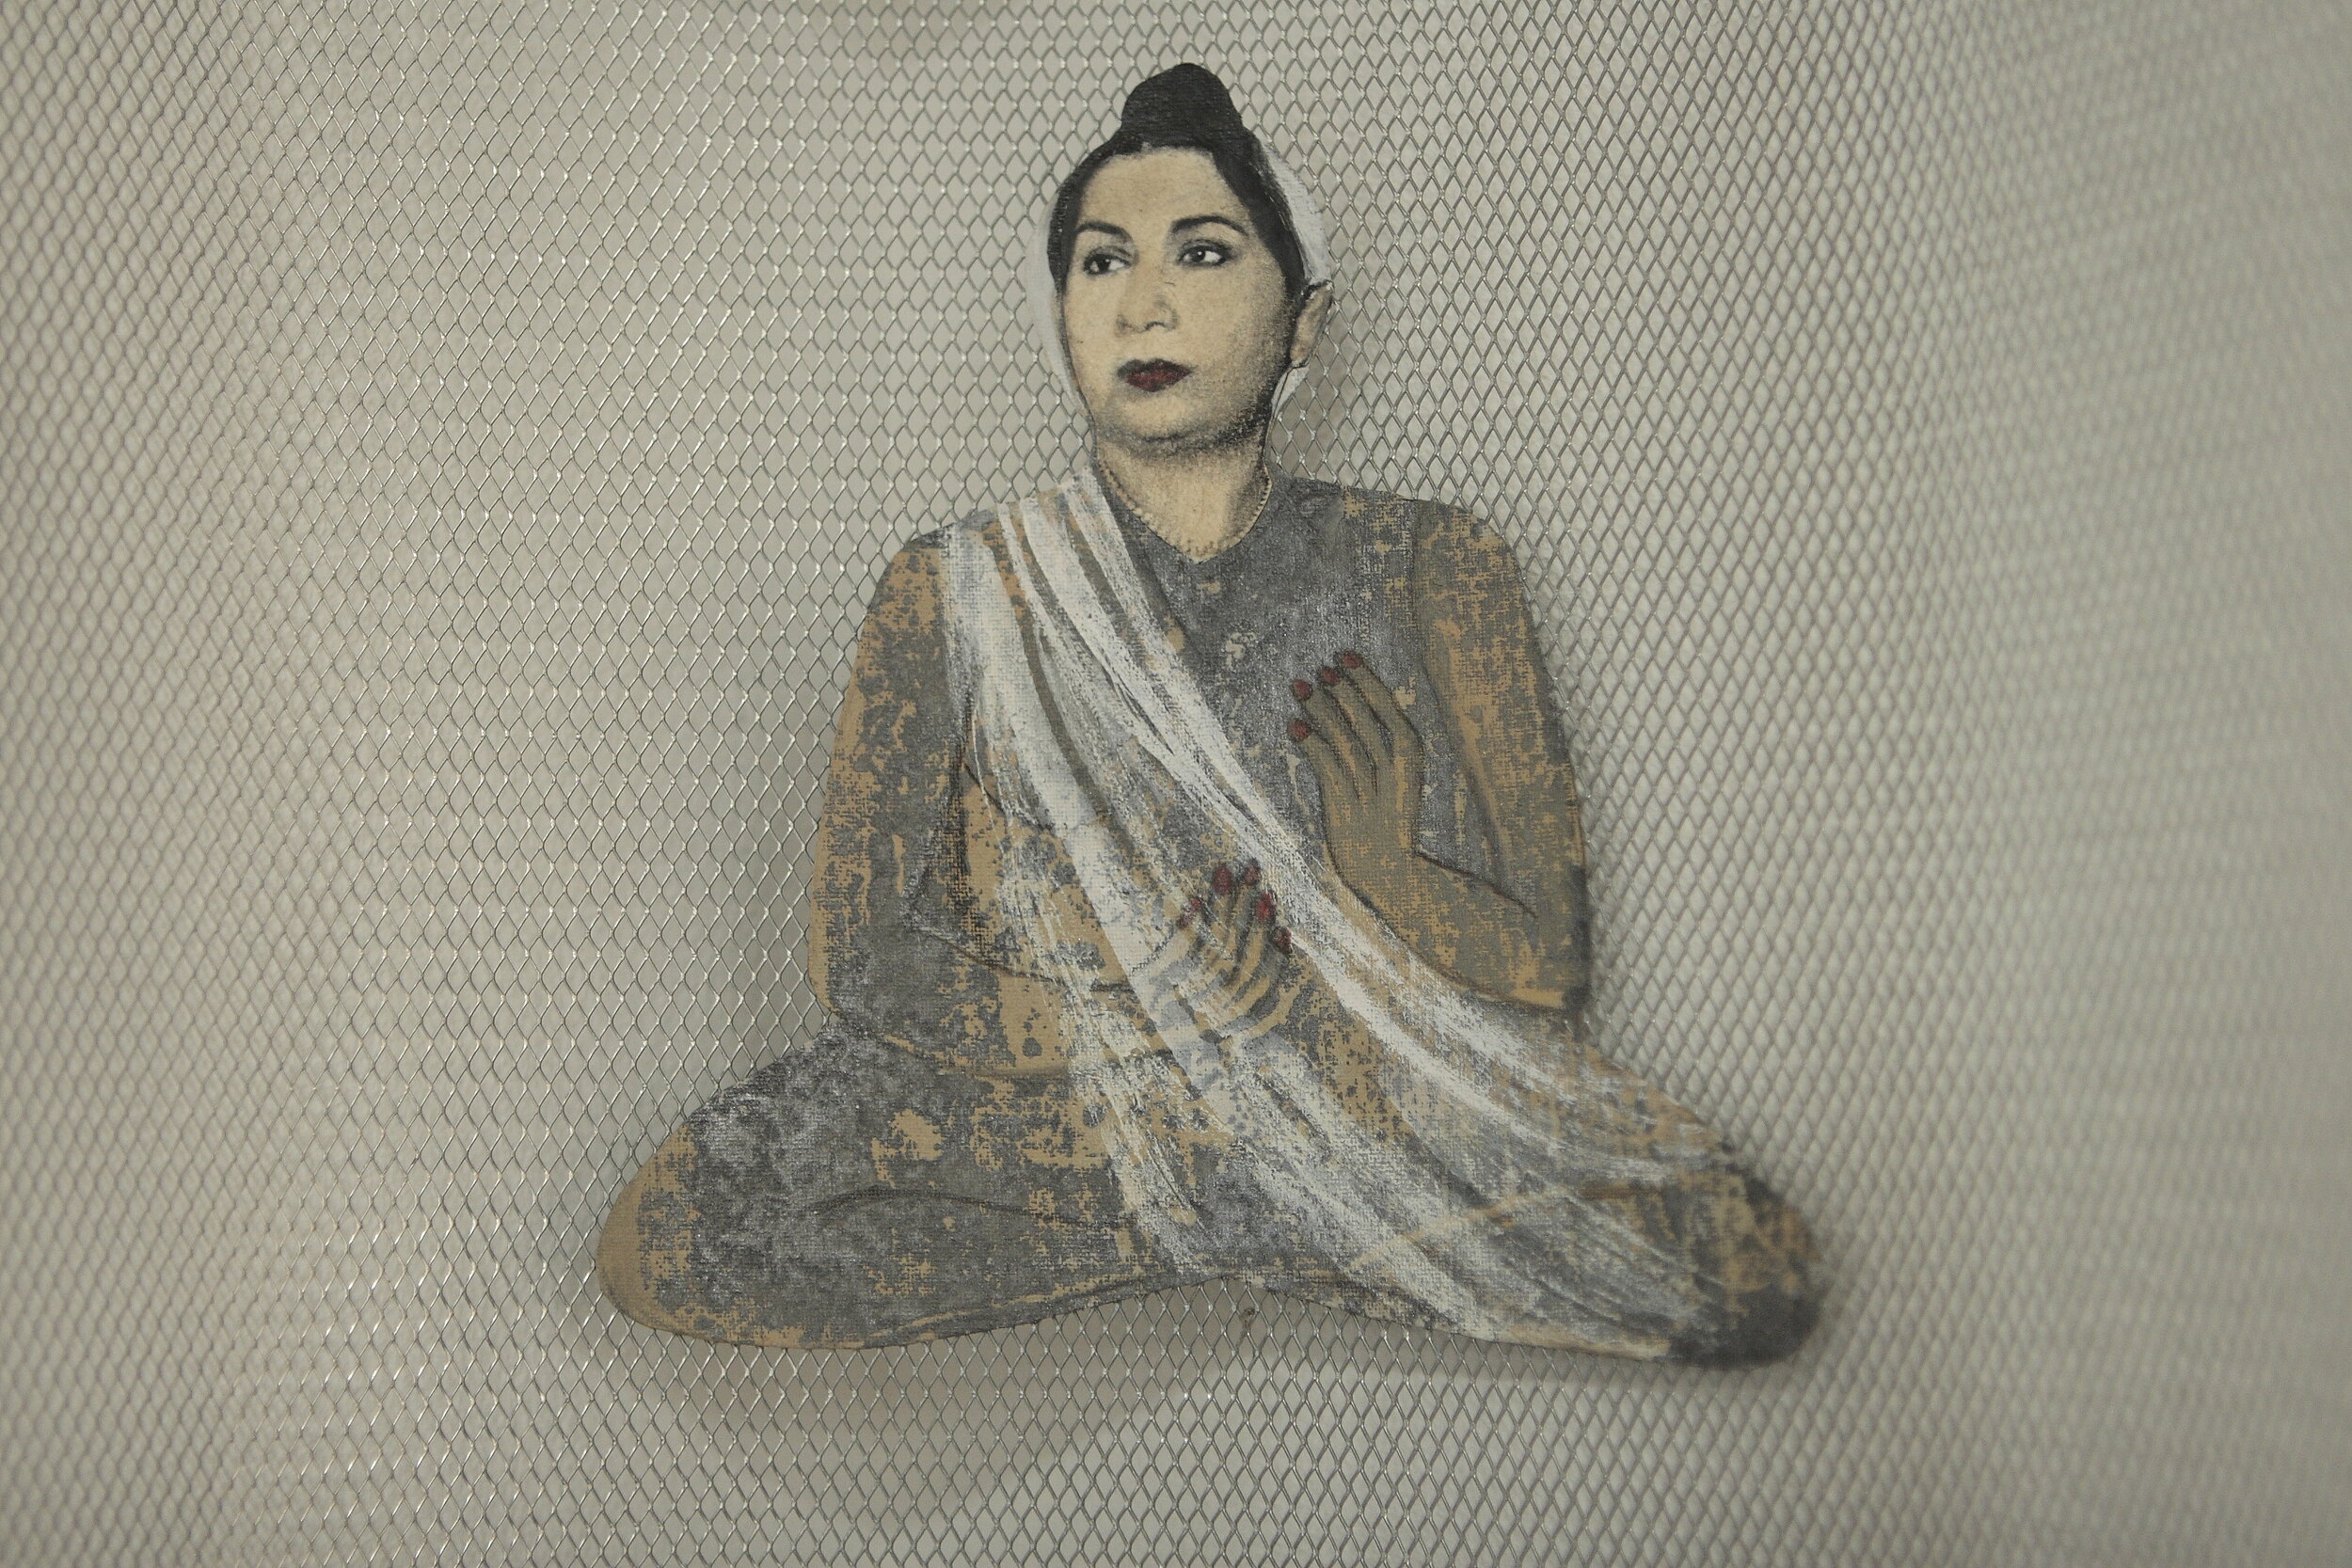  Suma Teacher (detail), 2006, painted photo collage and wire mesh, 151 x 28 x 23 cm 